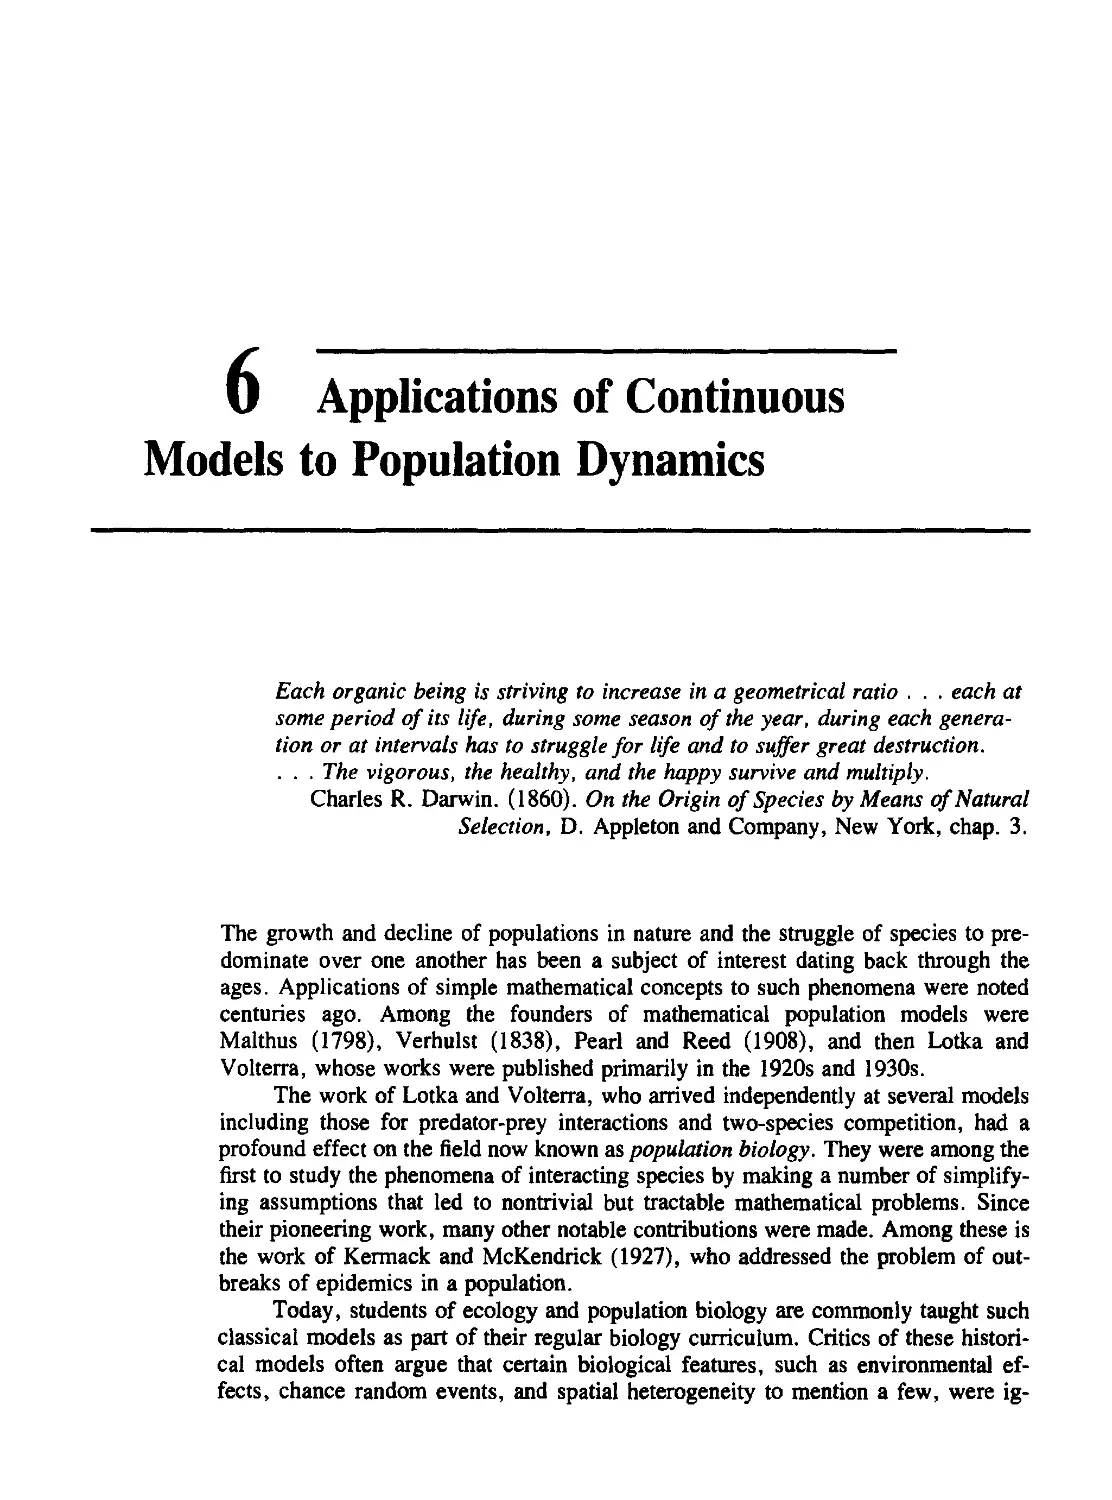 Chapter 6 Applications of Continuous Models to Population Dynamics